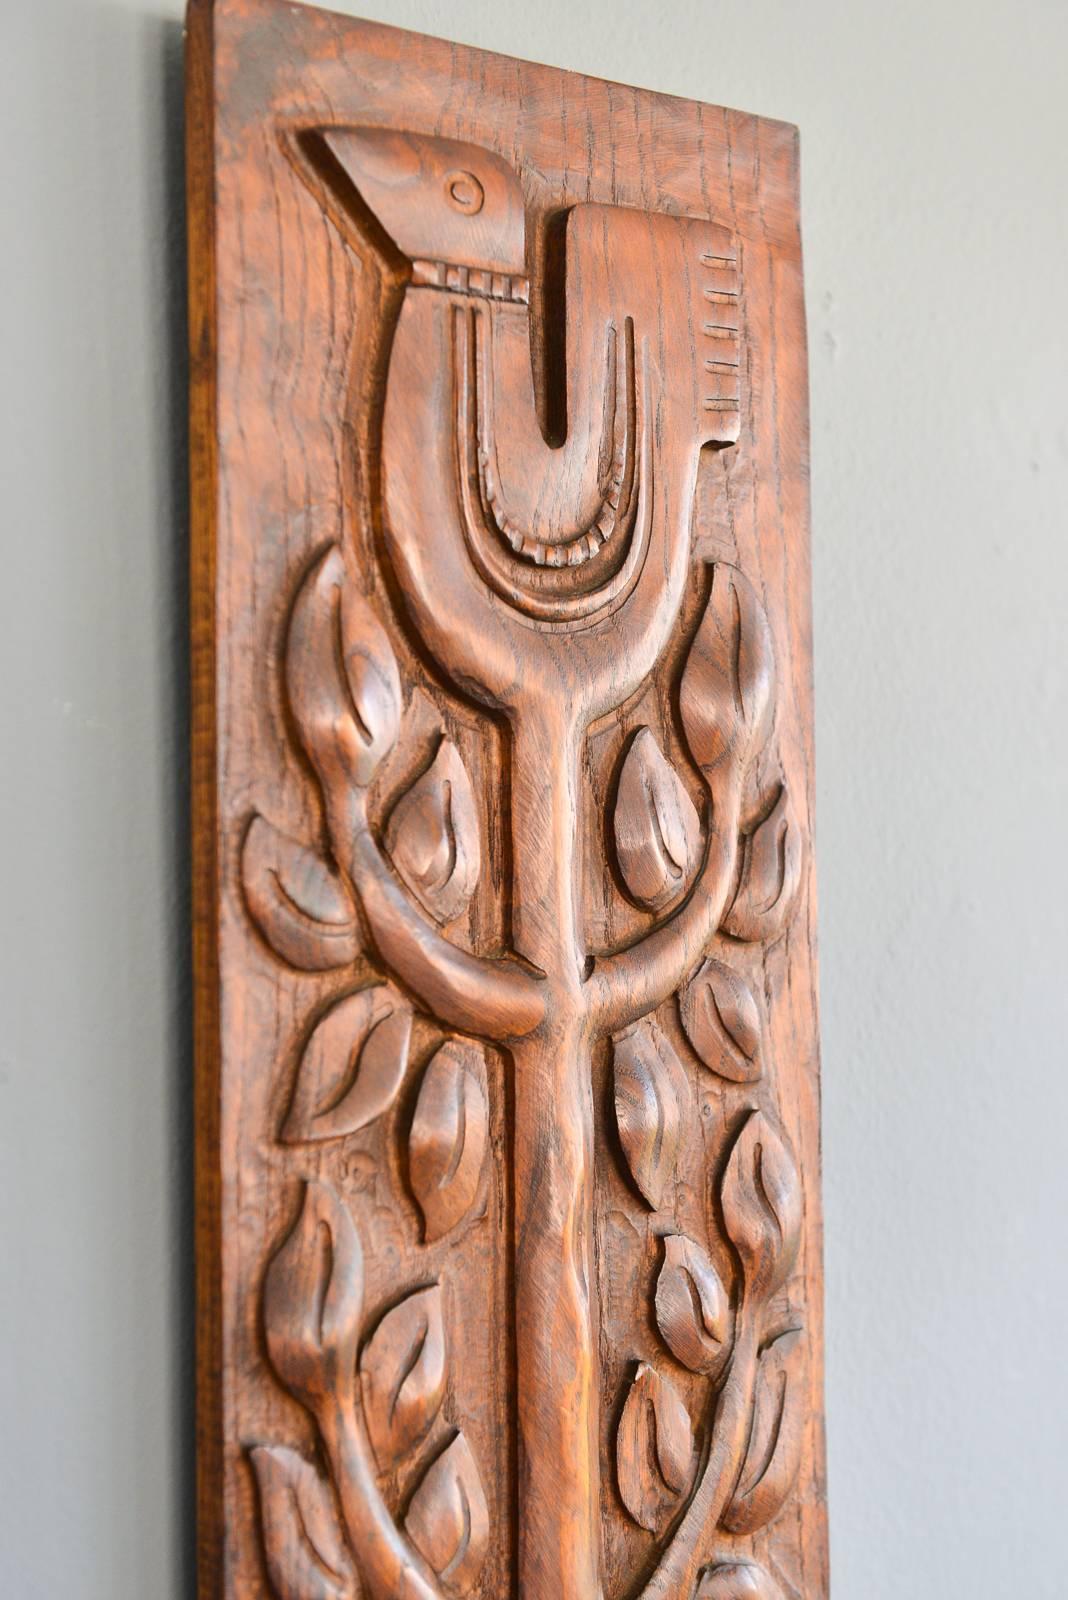 Evelyn Ackerman wood panelcarve title 'Tree of Life', circa 1965

Original, excellent condition with makers mark on reverse. 

Measures: 36